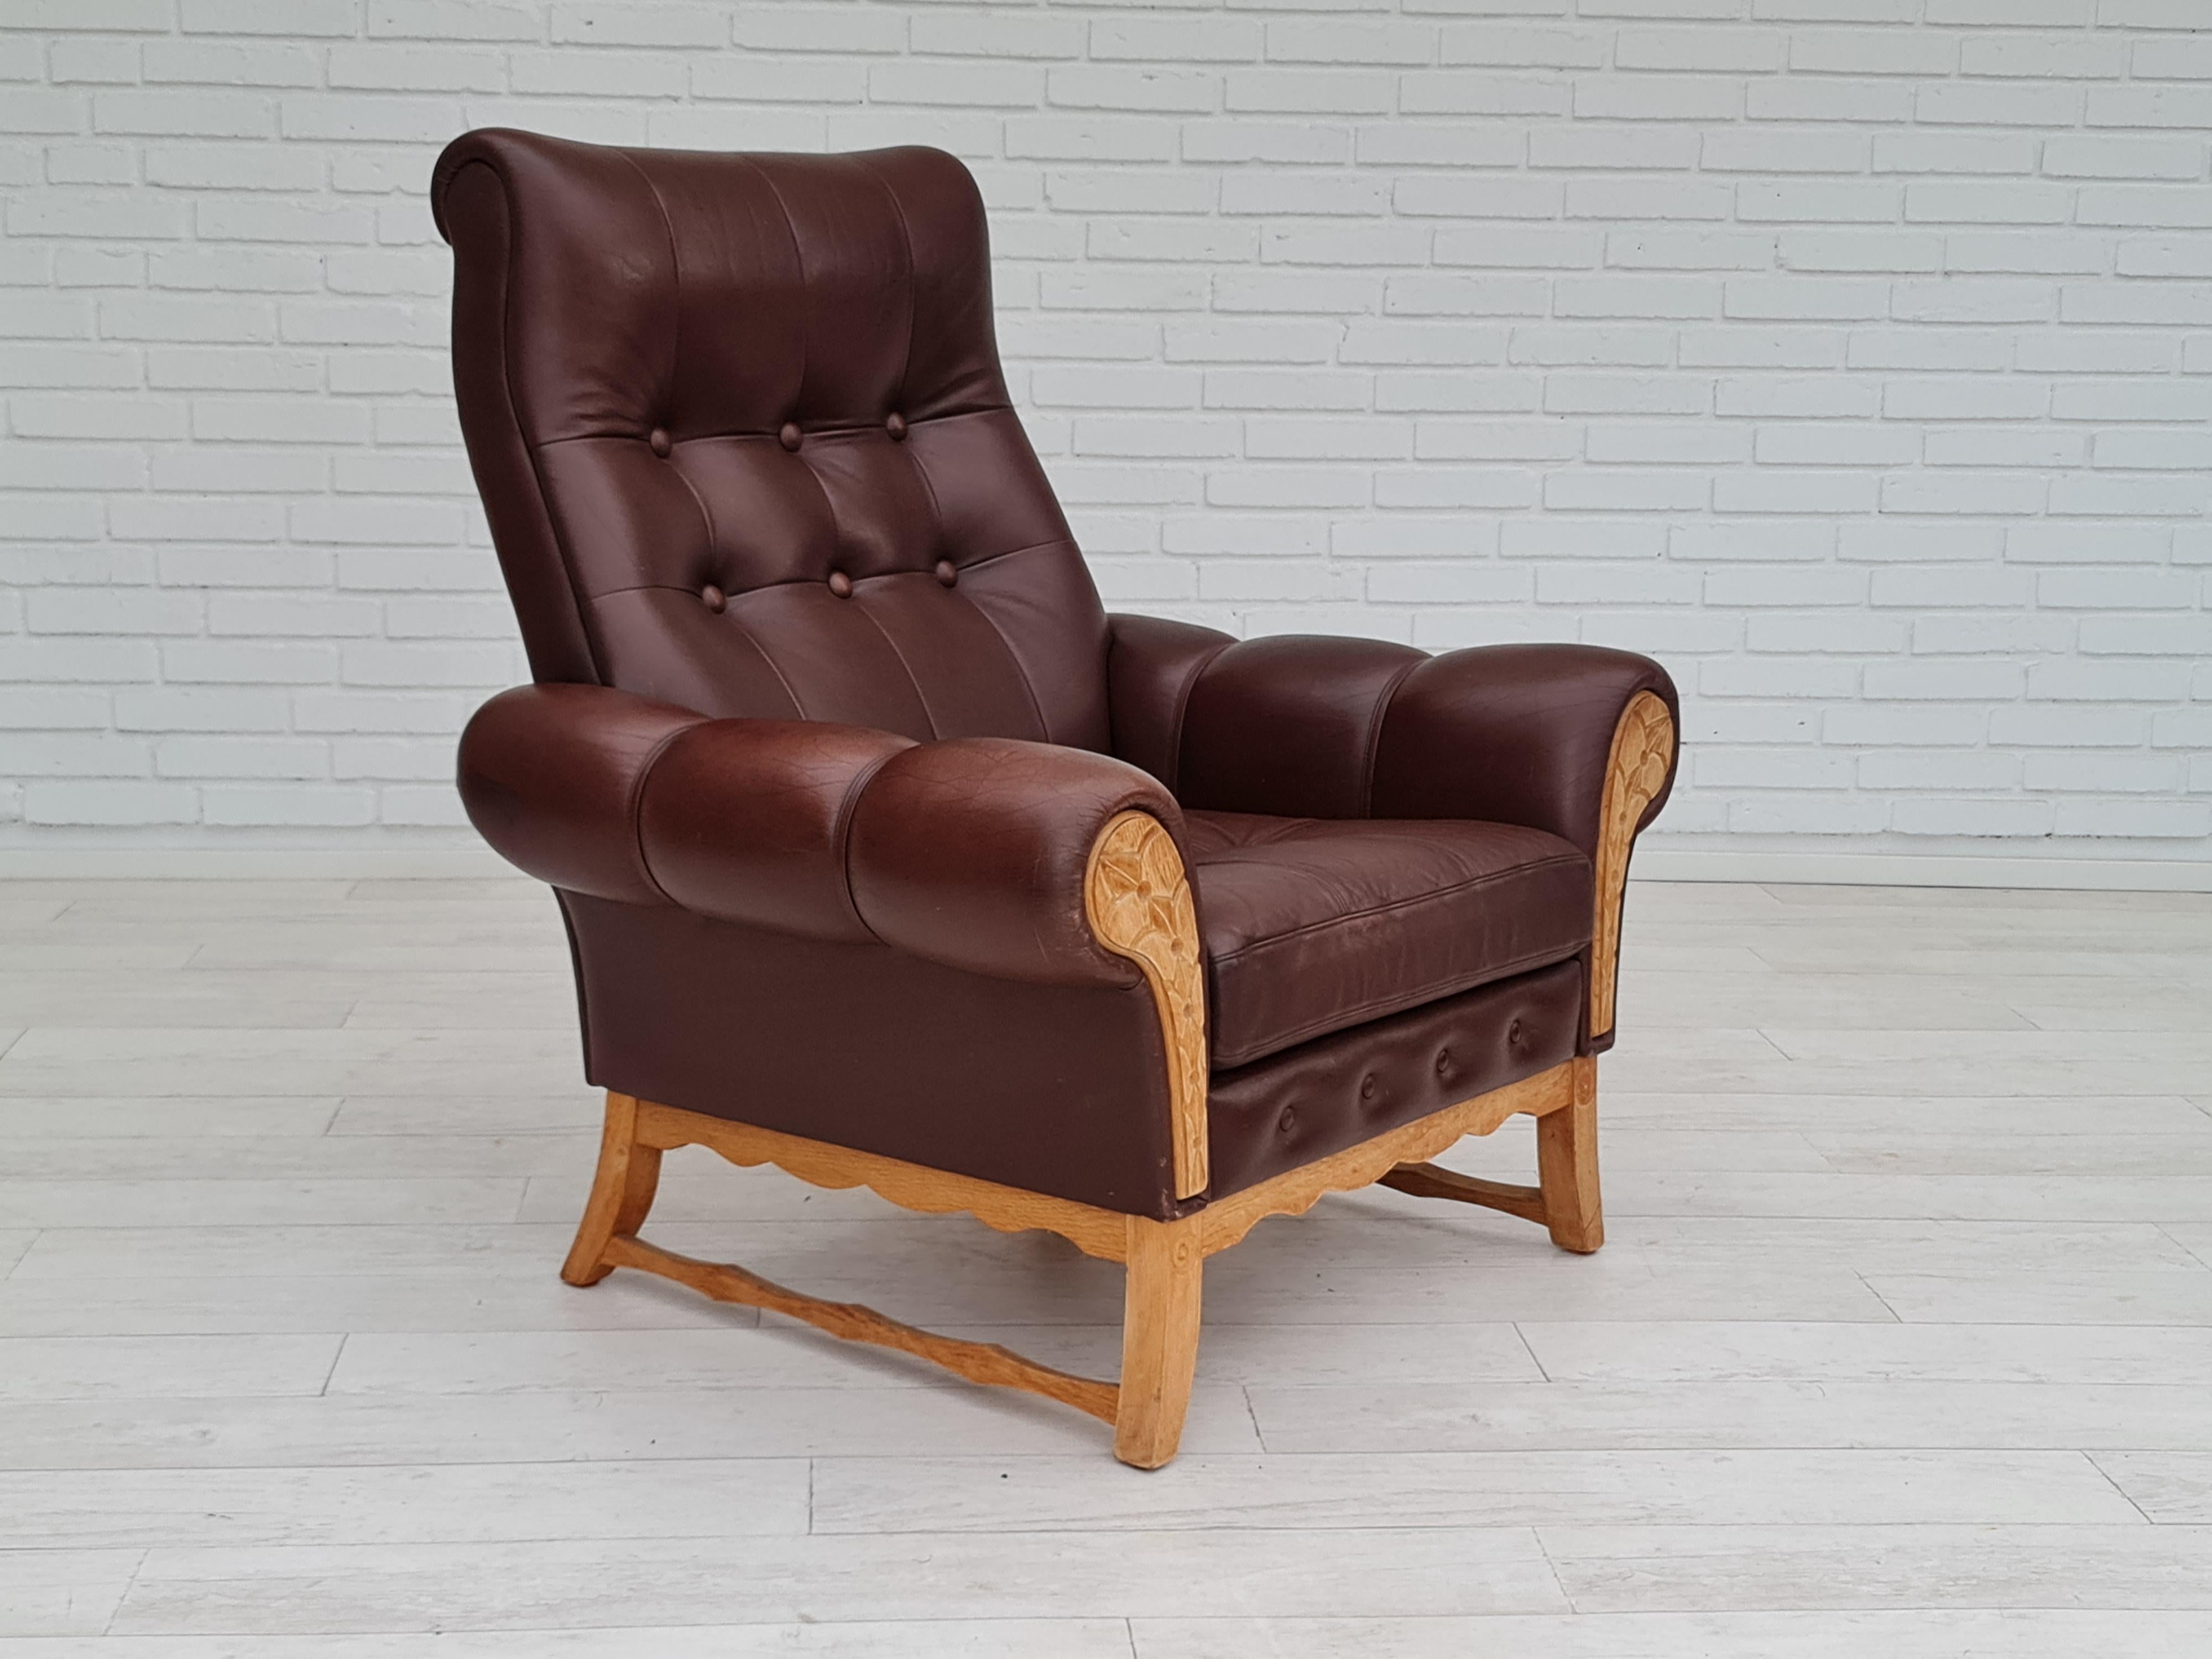 1970s, vintage Danish highback armchair, leather, oak wood In Good Condition For Sale In Tarm, 82